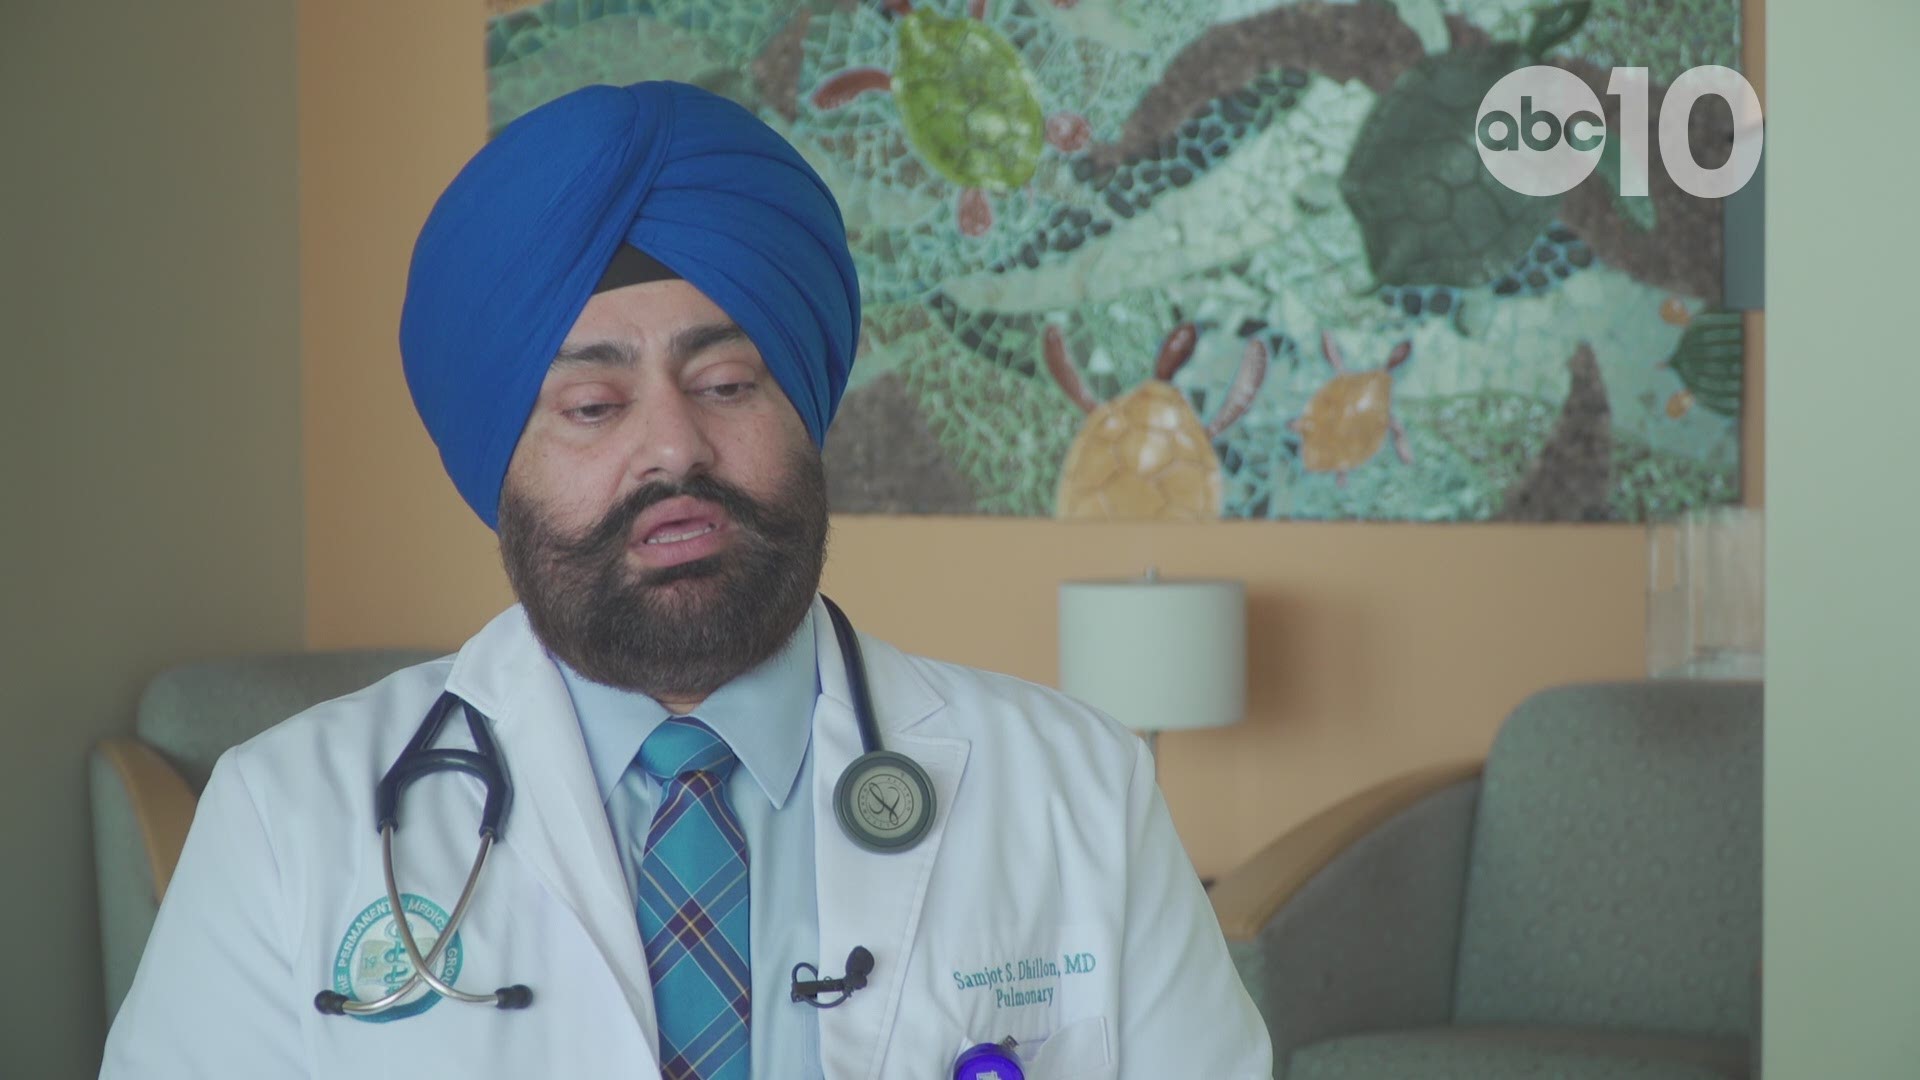 Dr. Samjot Dhillon is a pulmonologist who treated Ricky D'Ambrosio, 21, after he was hospitalized for acute respiratory failure from vaping.